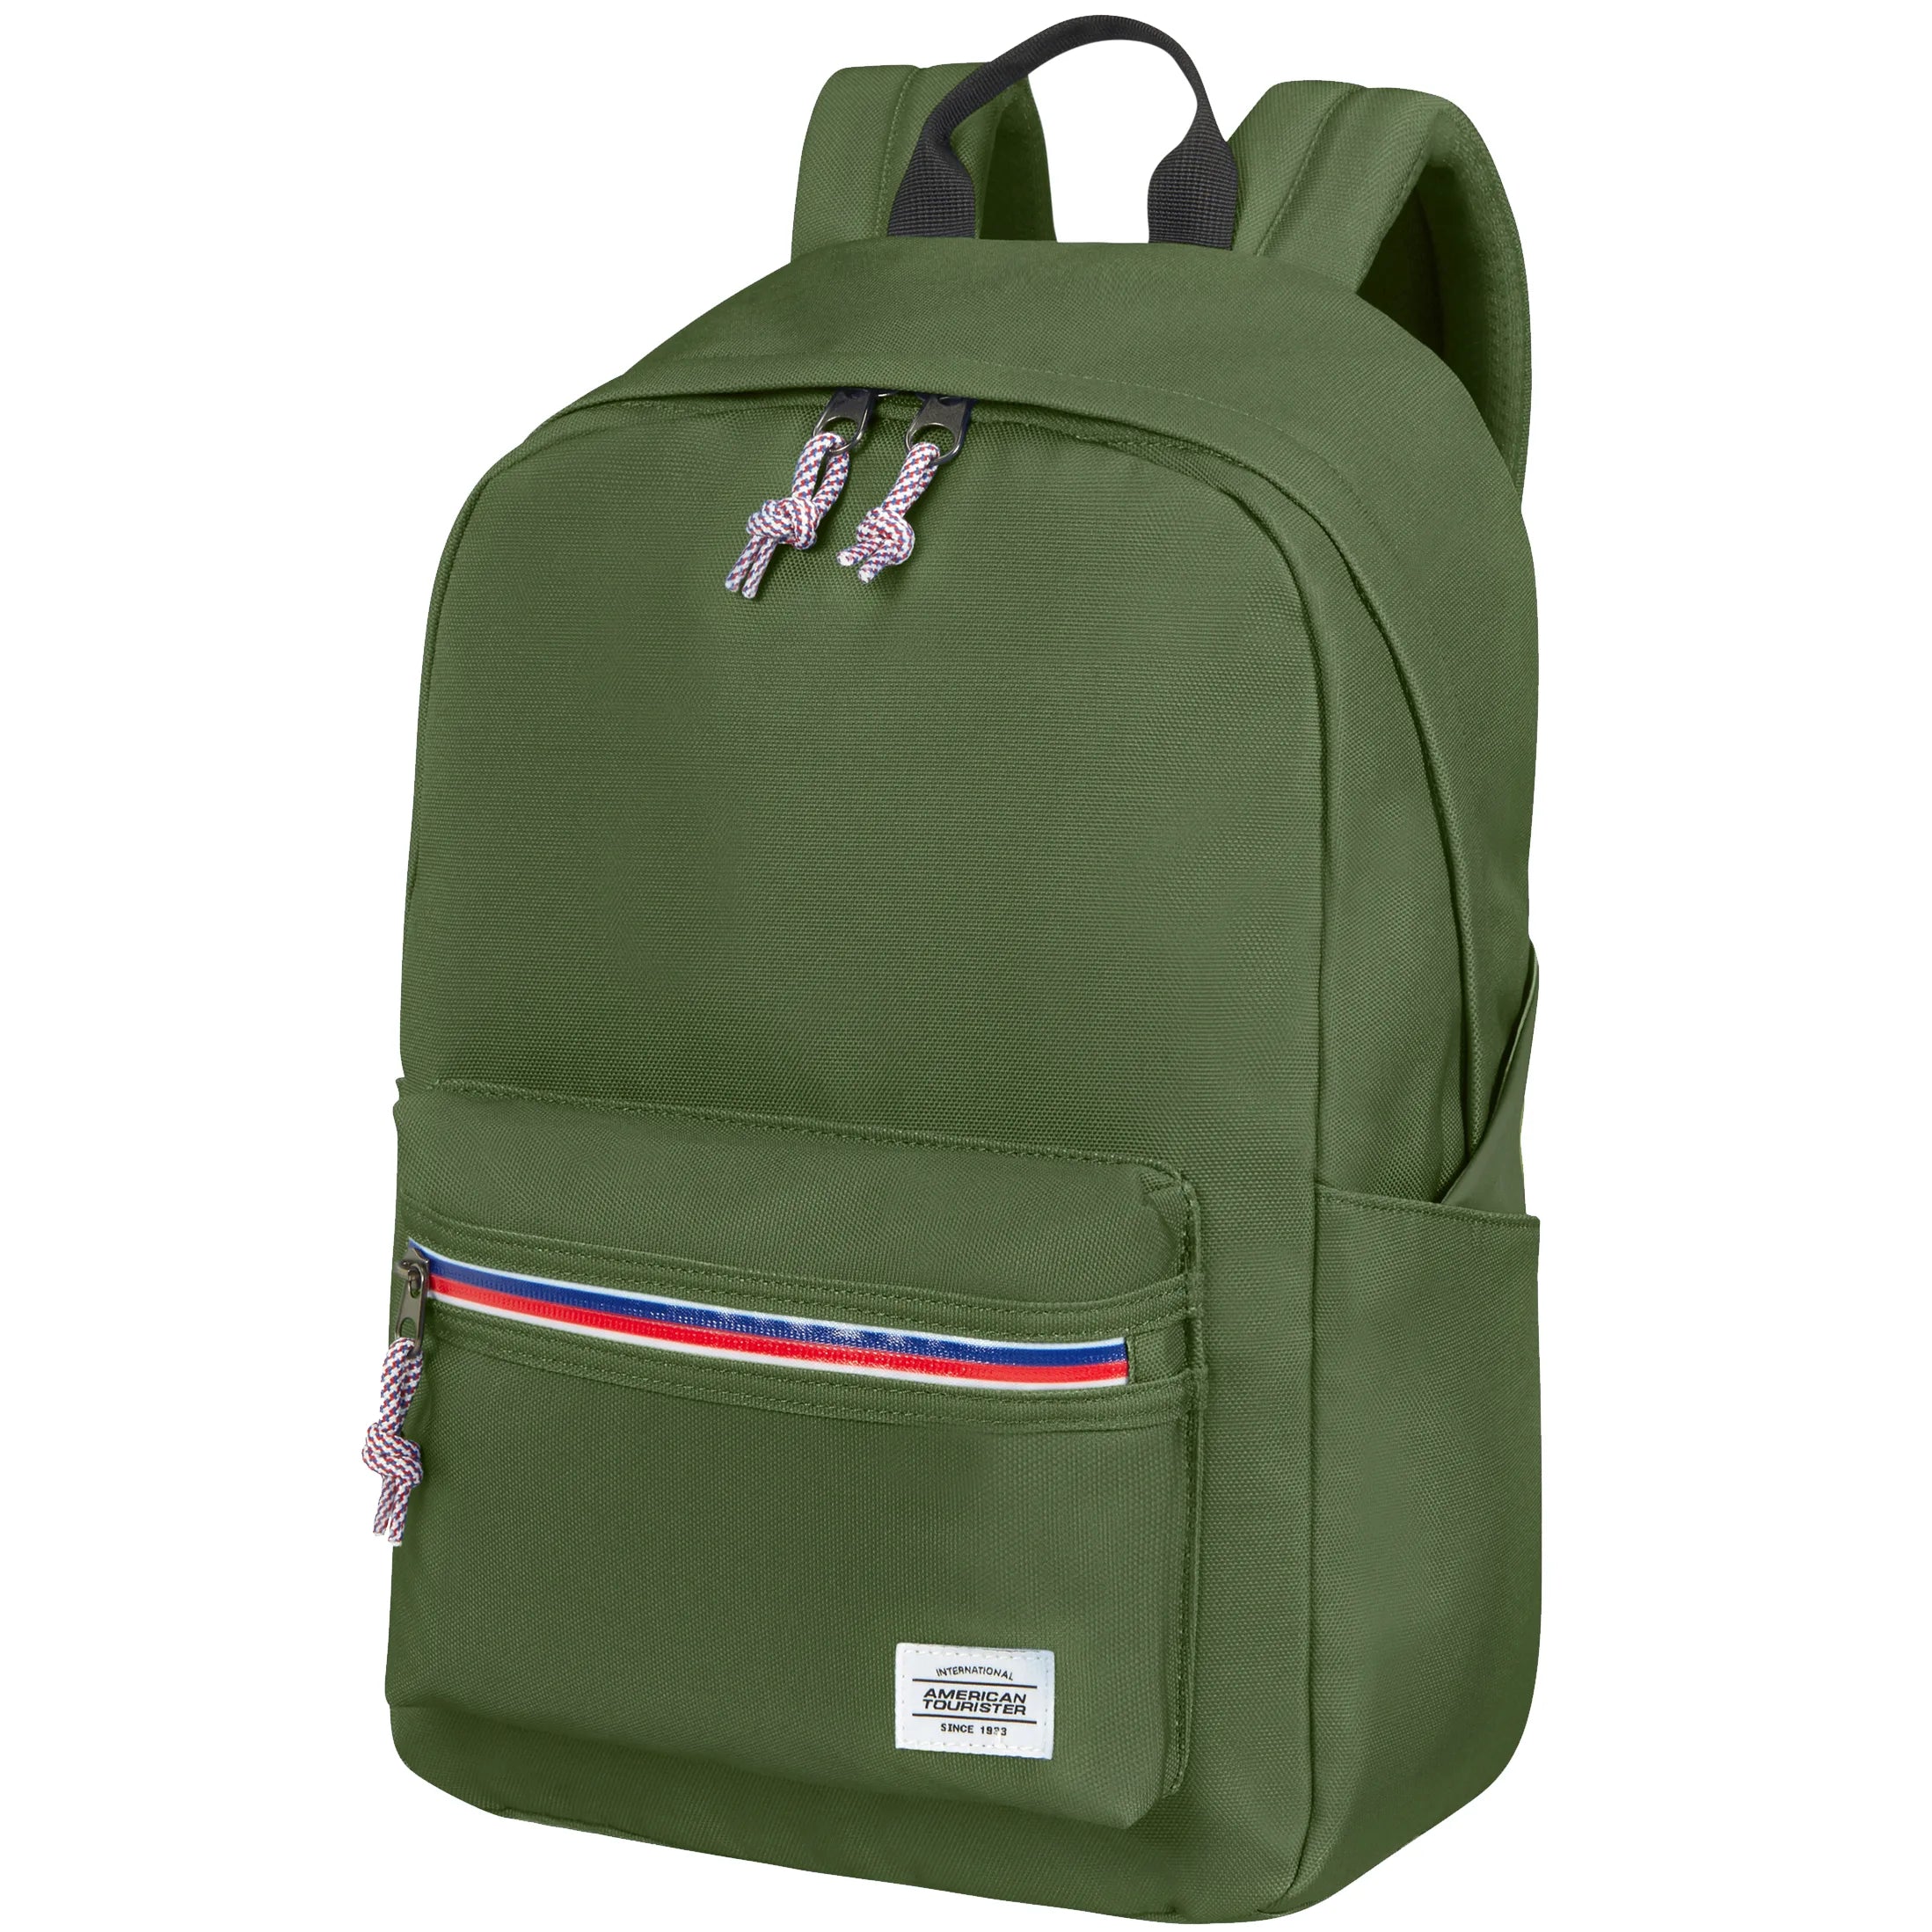 American Tourister Upbeat leisure backpack 42 cm - olive green